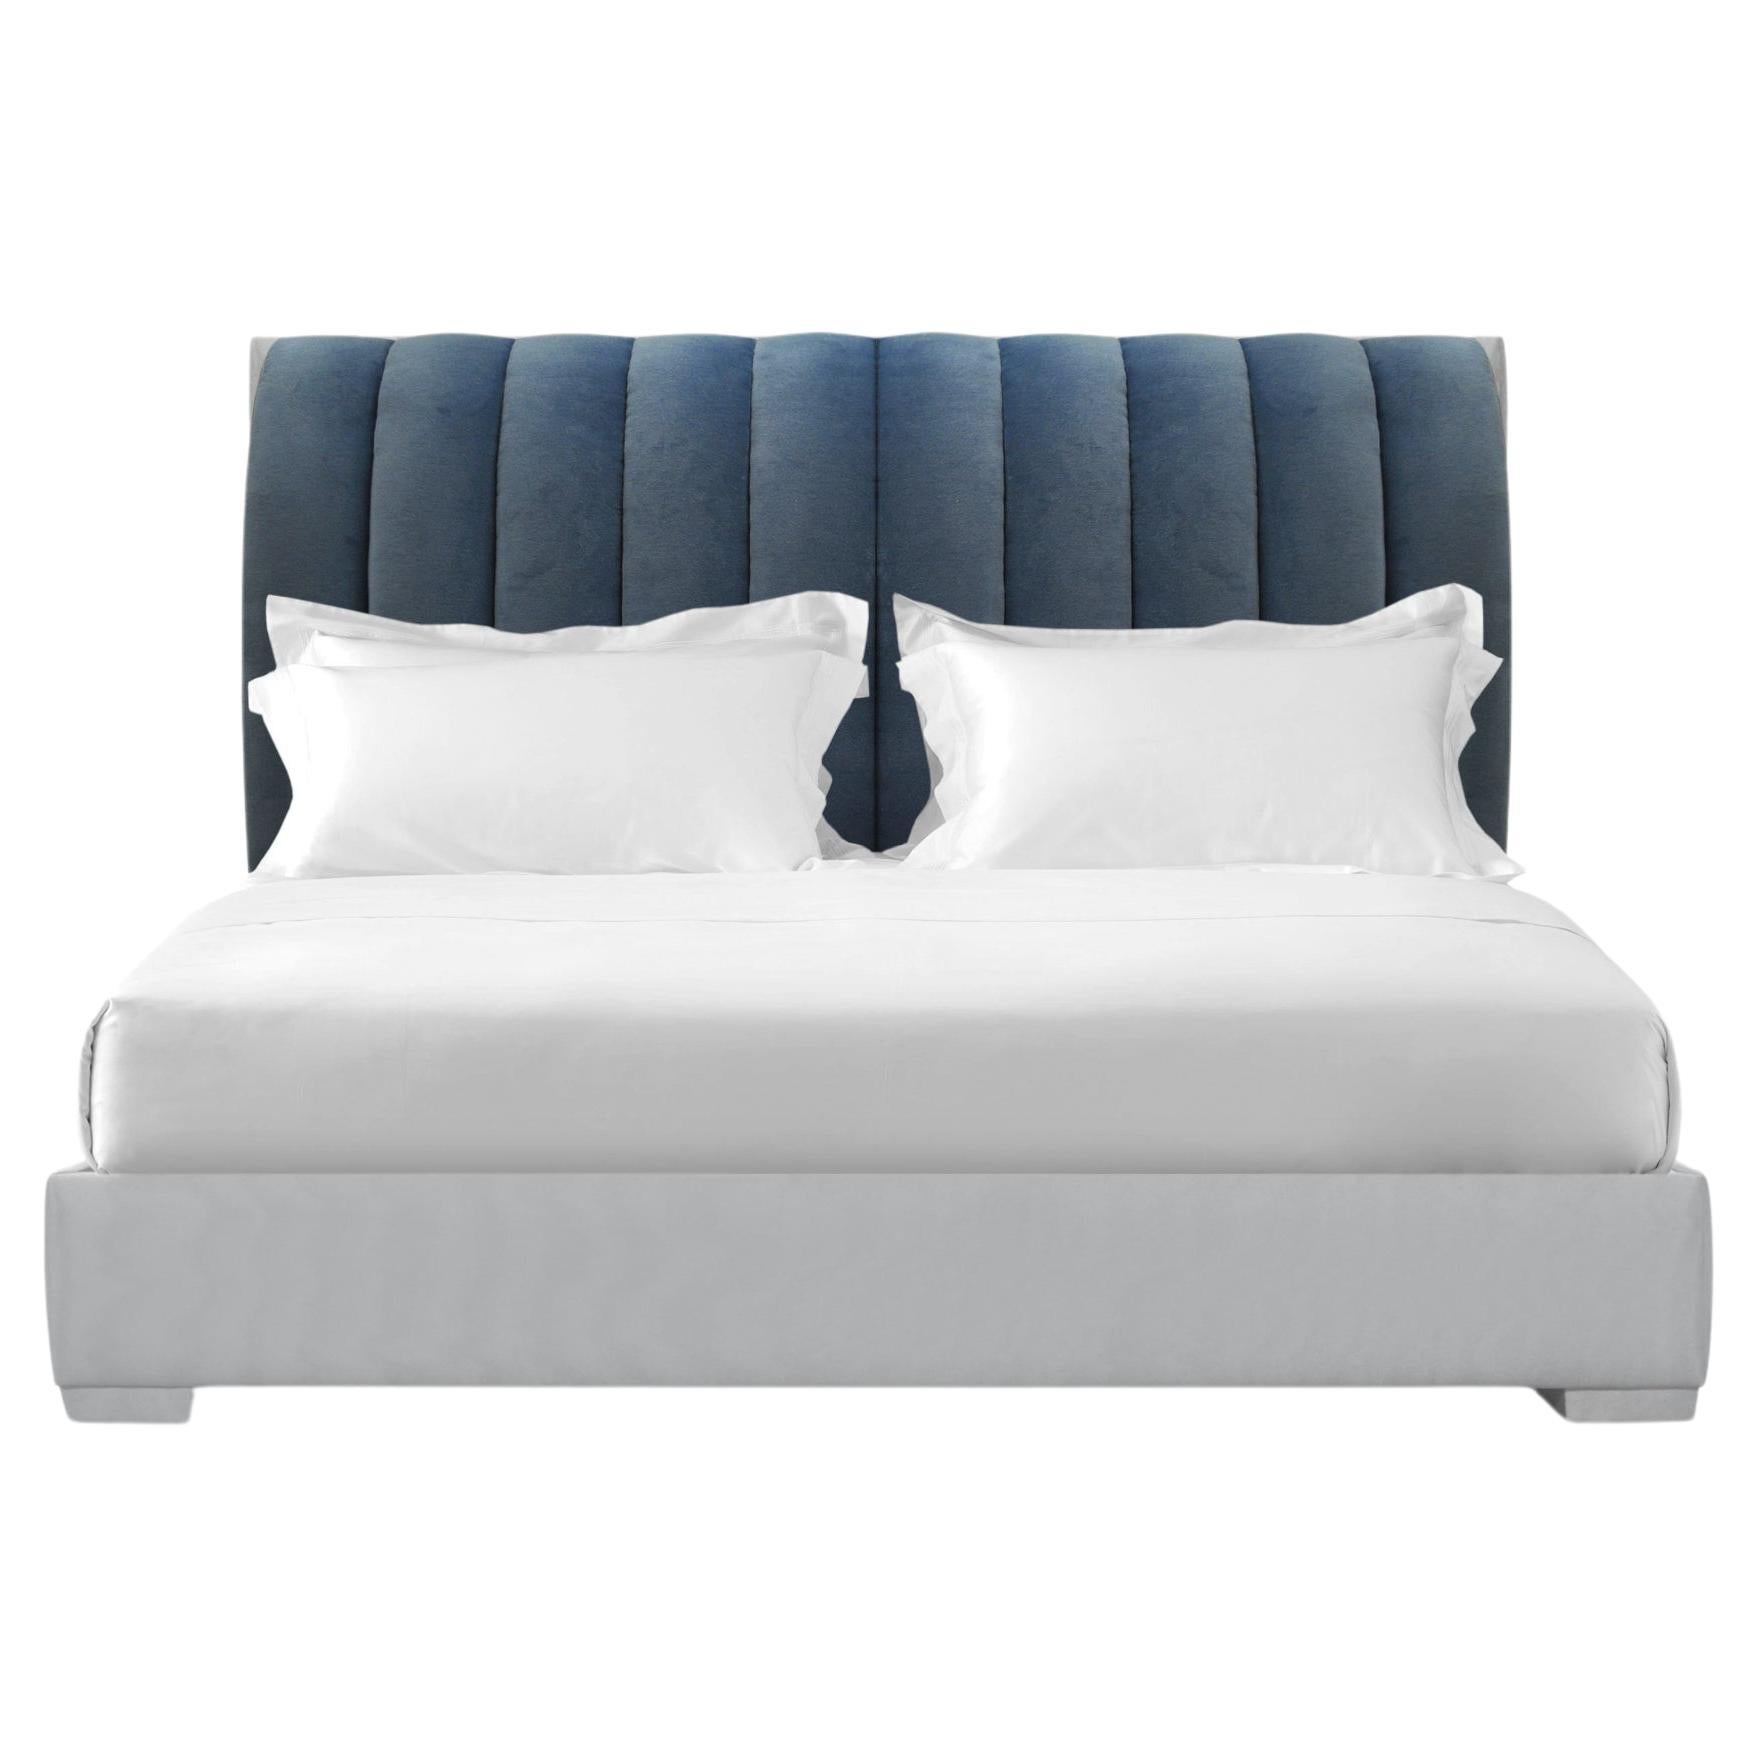 Savoir Couturier Headboard & Nº2 Bed Set, US King Size, by Robert Couturier